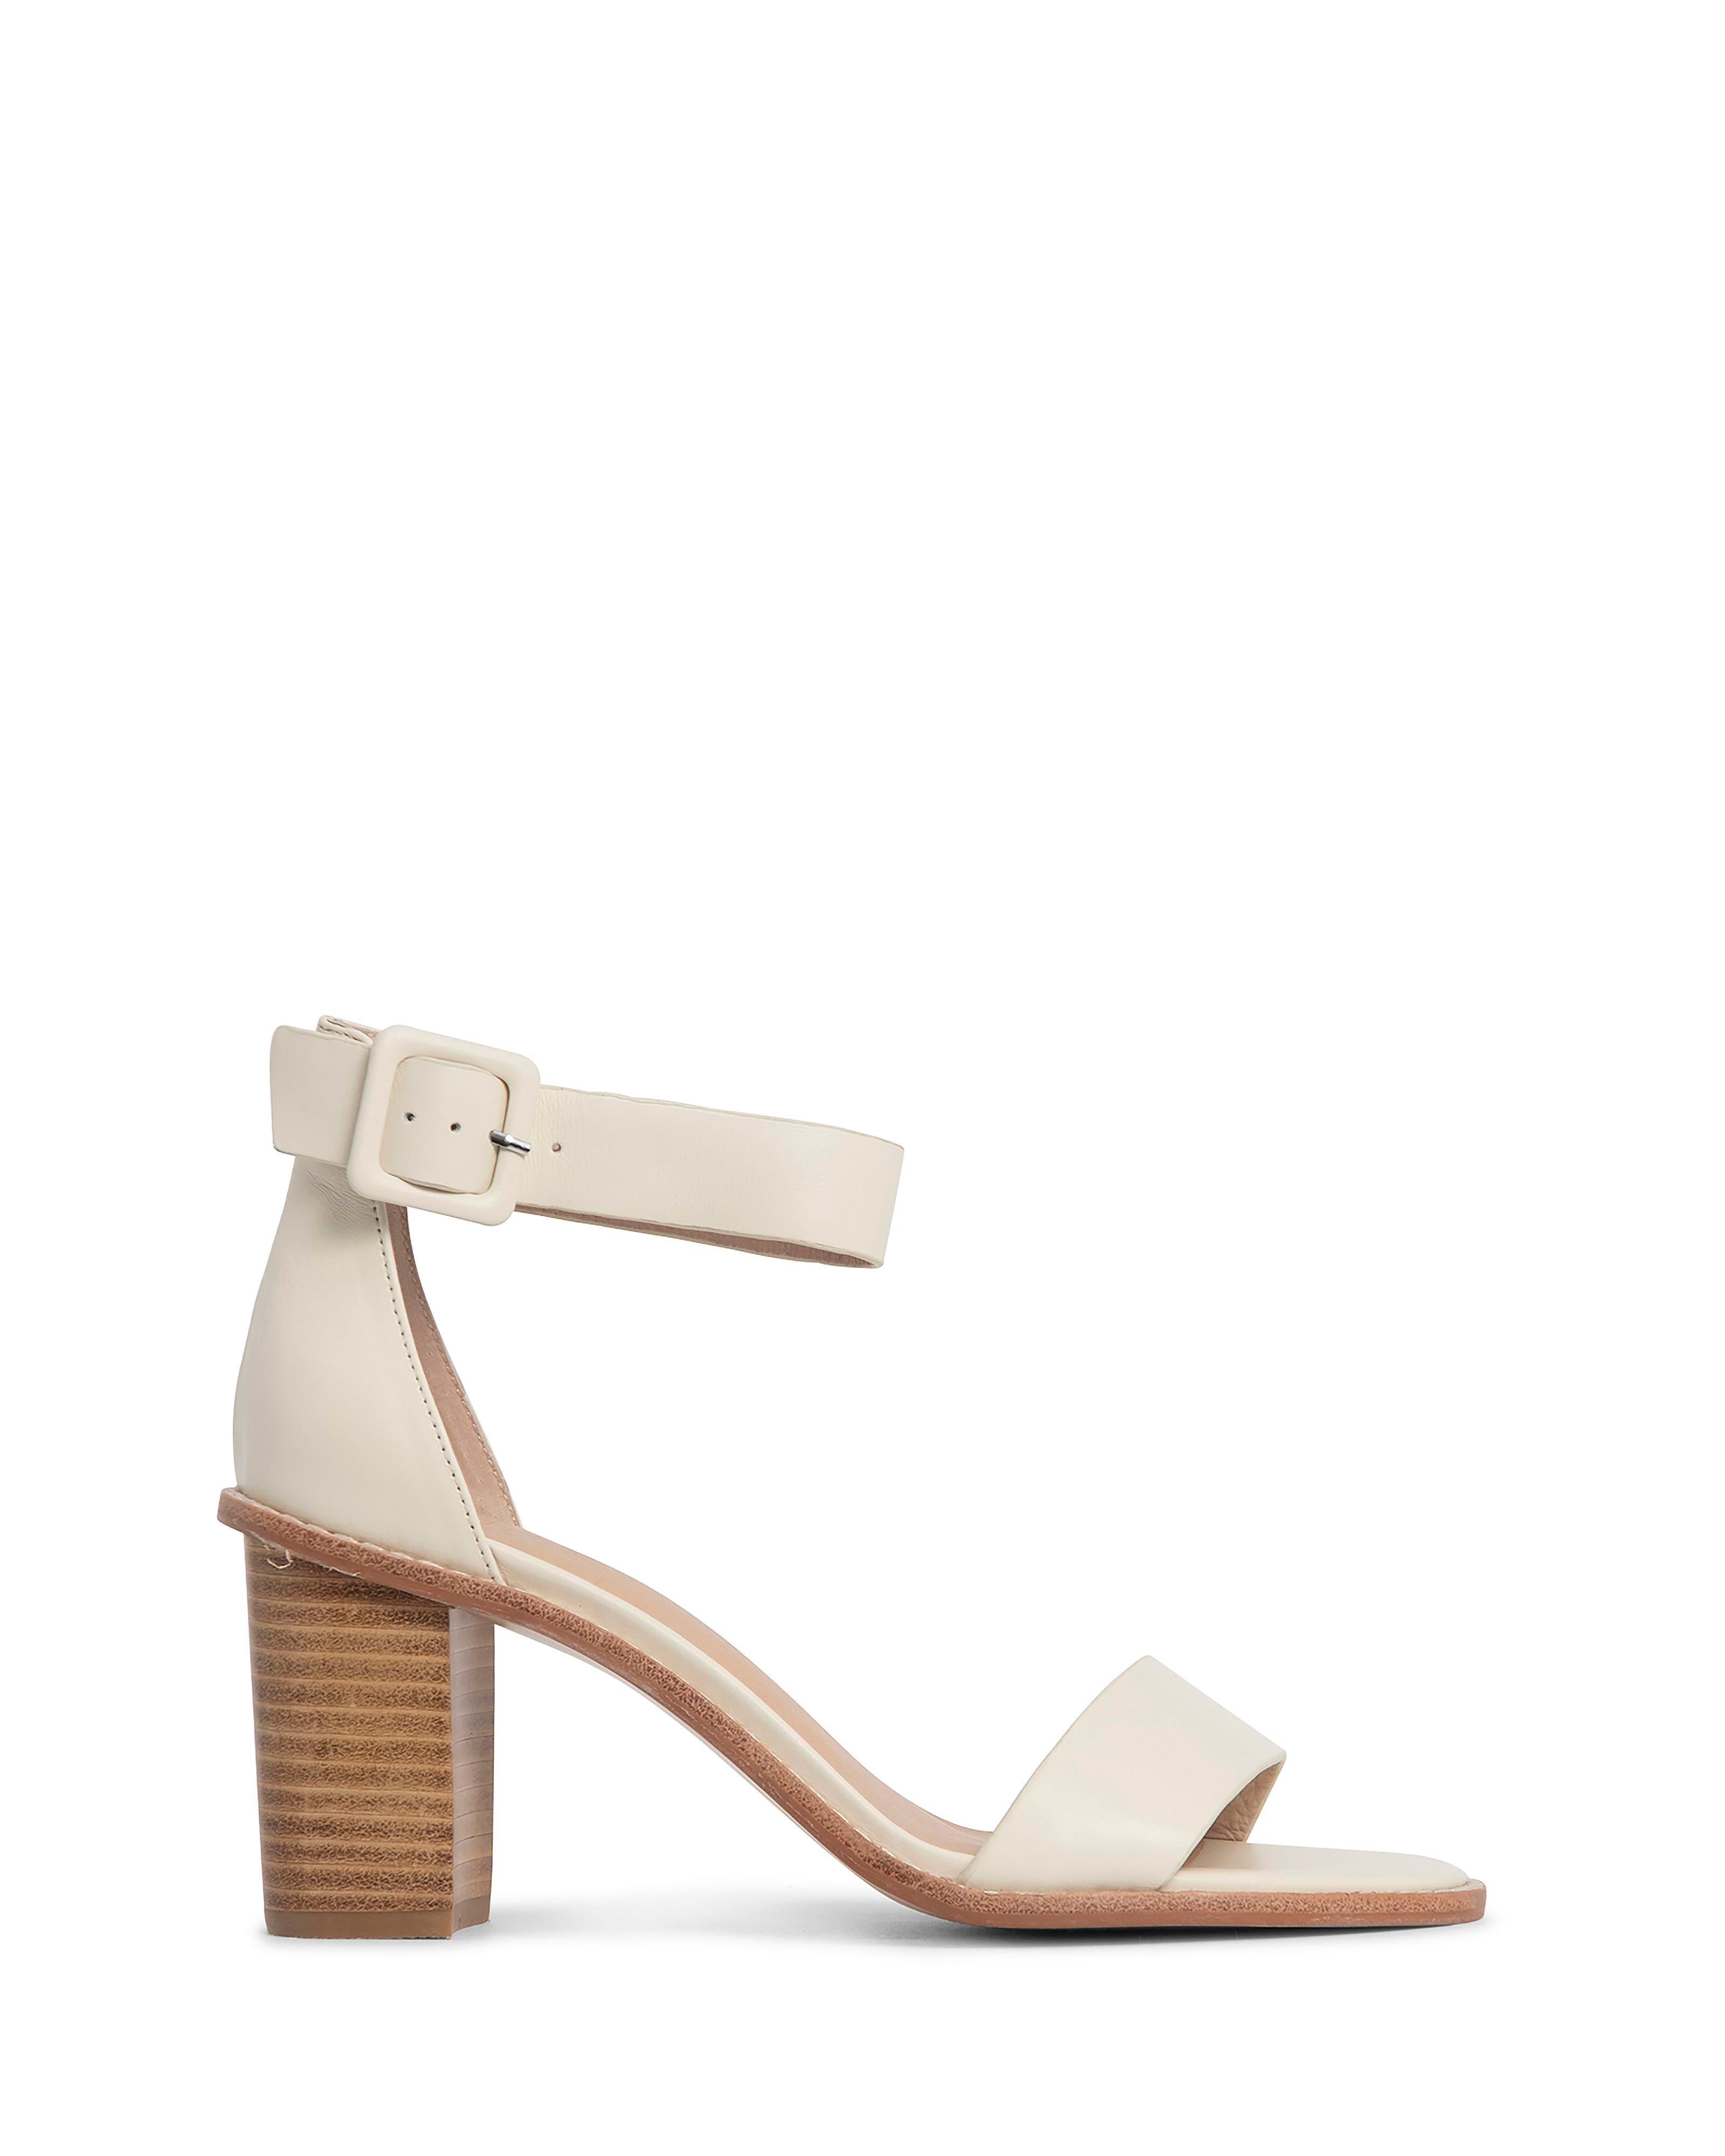 Grady Warm White 7.5cm Leather Veneer Stacked Block Heel with Adjustable Square Buckle